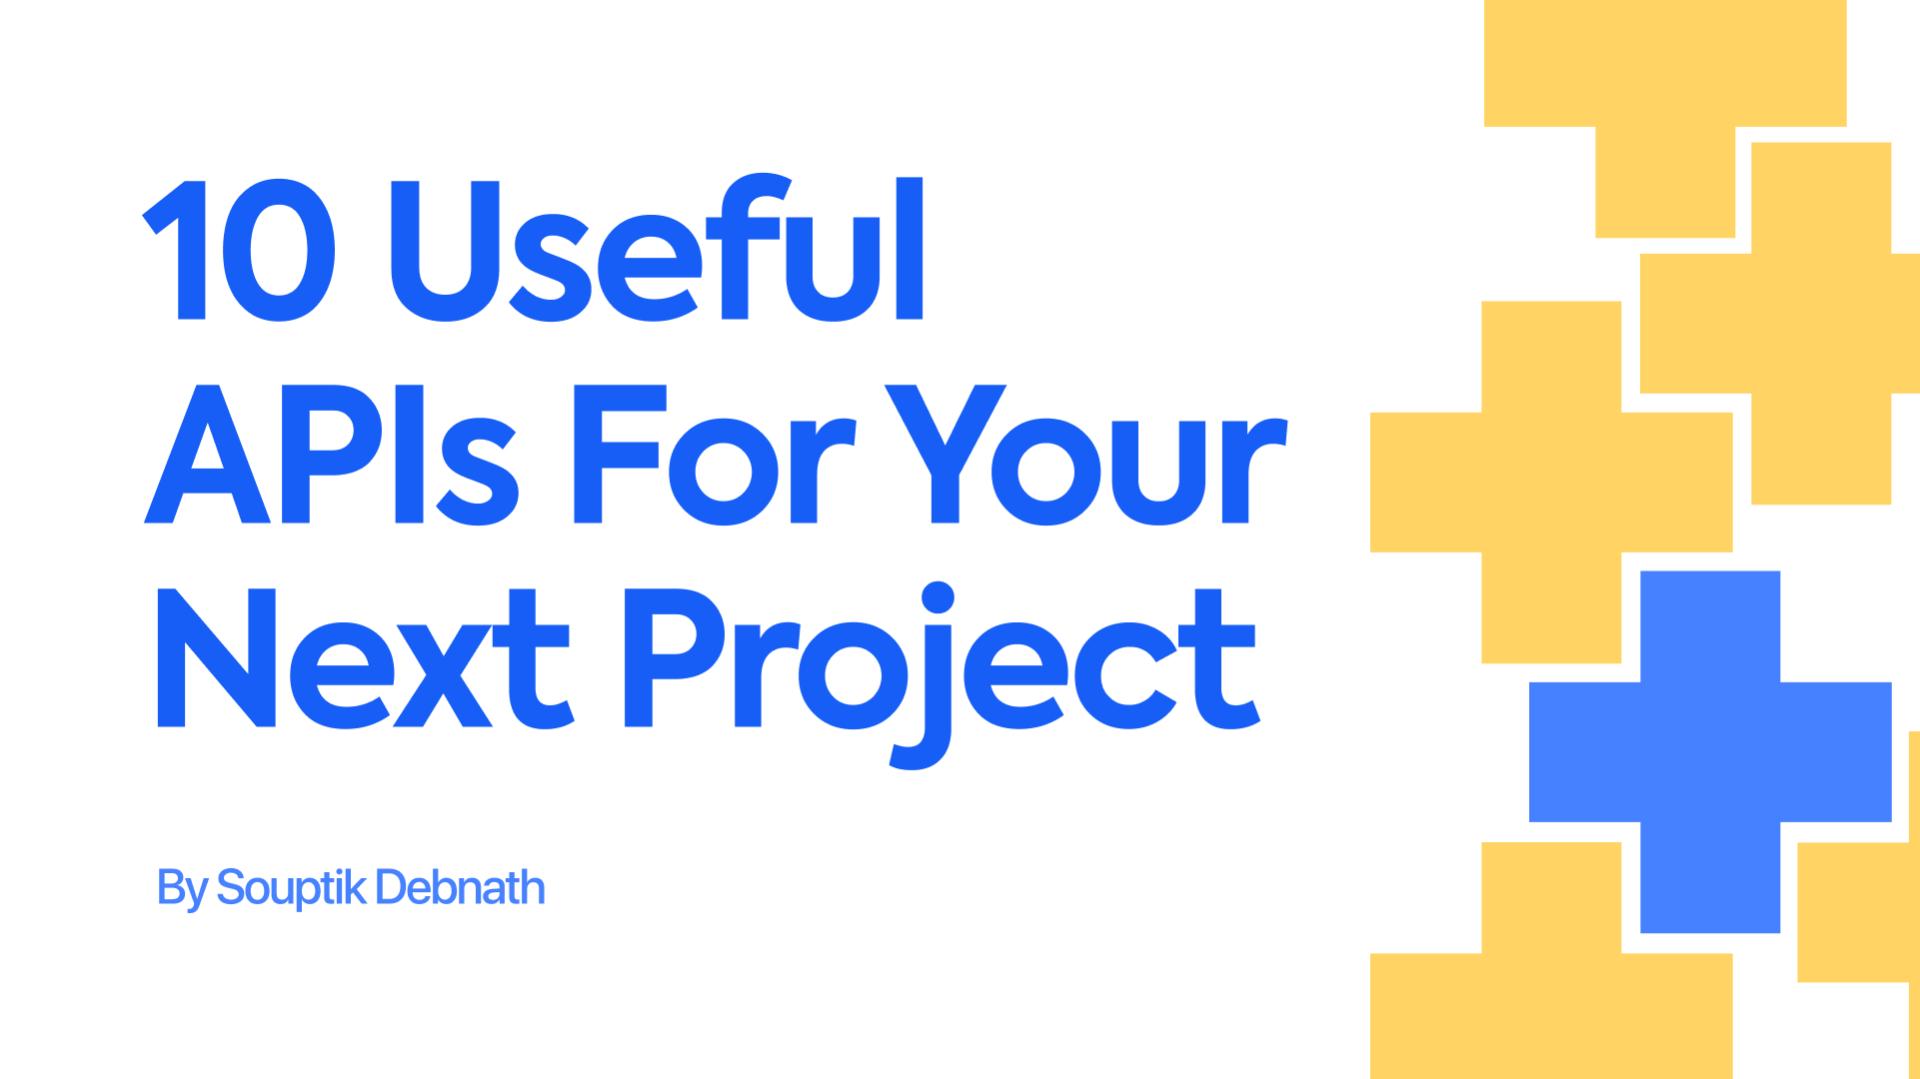 10 Useful APIs For Your Next Project 📃